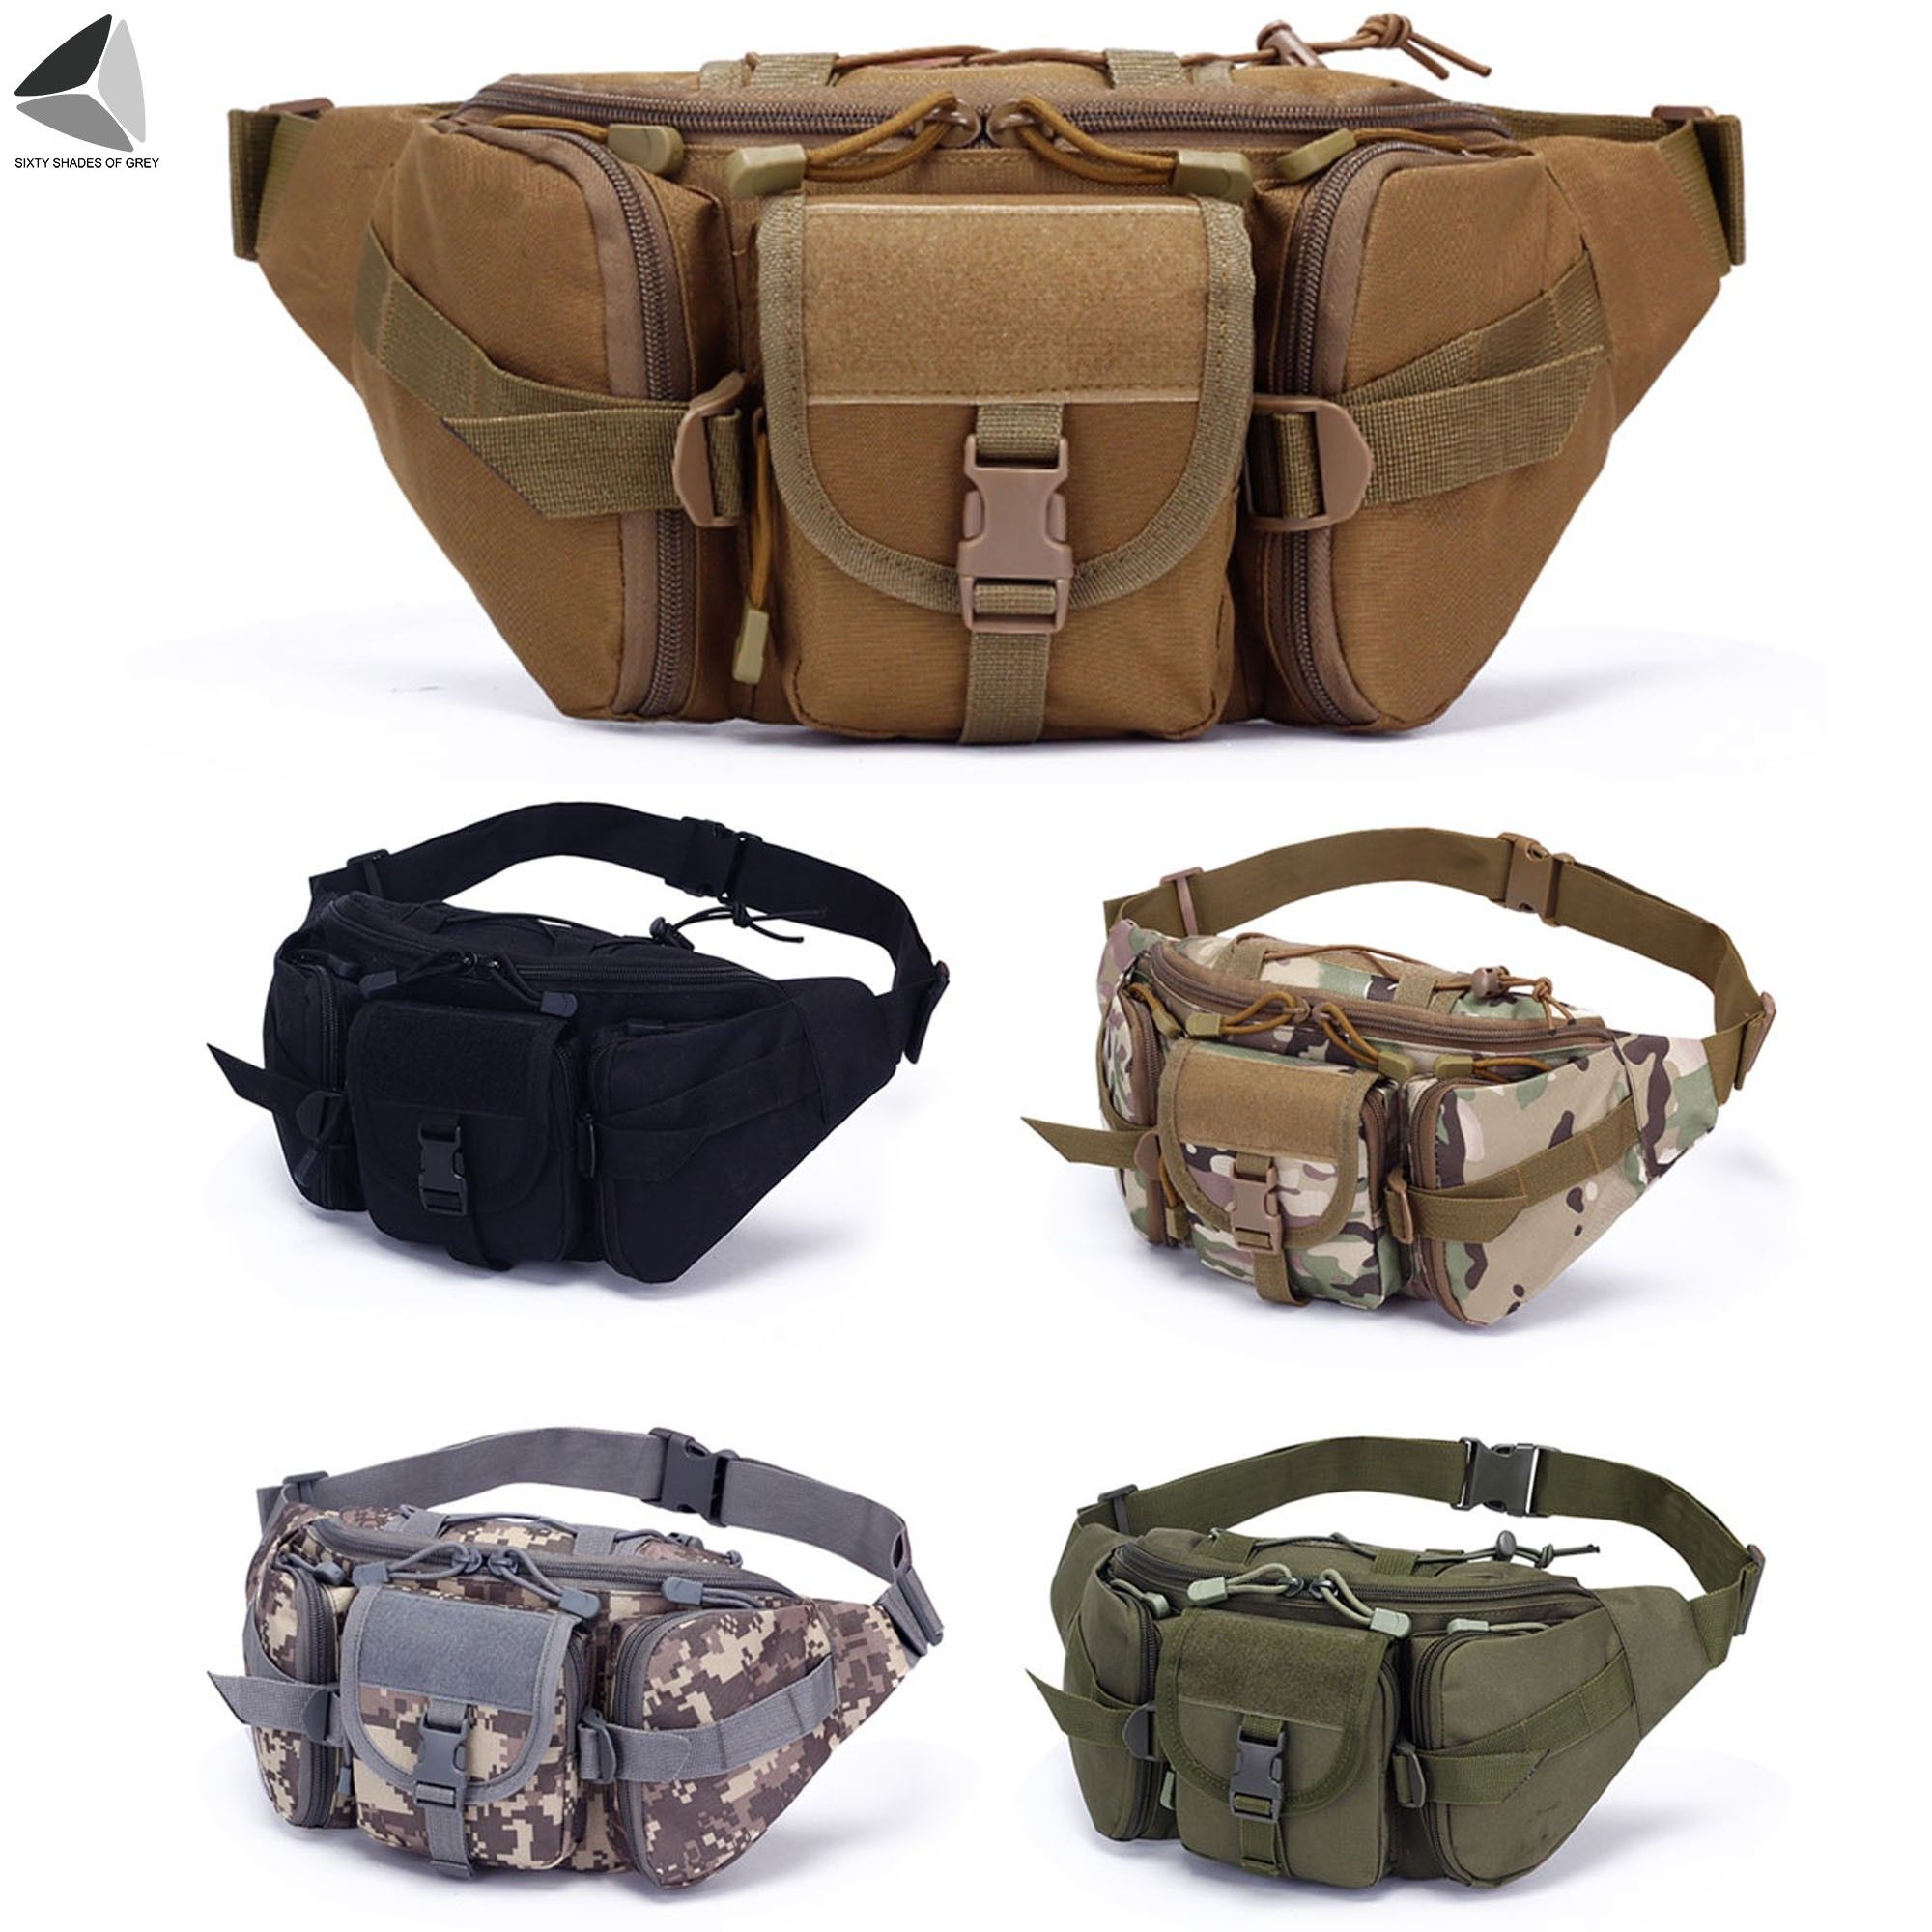 PULLIMORE Fanny Pack Waist Bag Pack Utility Hip Pack Bag with Adjustable Strap Waterproof for Outdoors Fishing Cycling Camping Hiking Traveling Hunting (Camouflage) - image 5 of 9